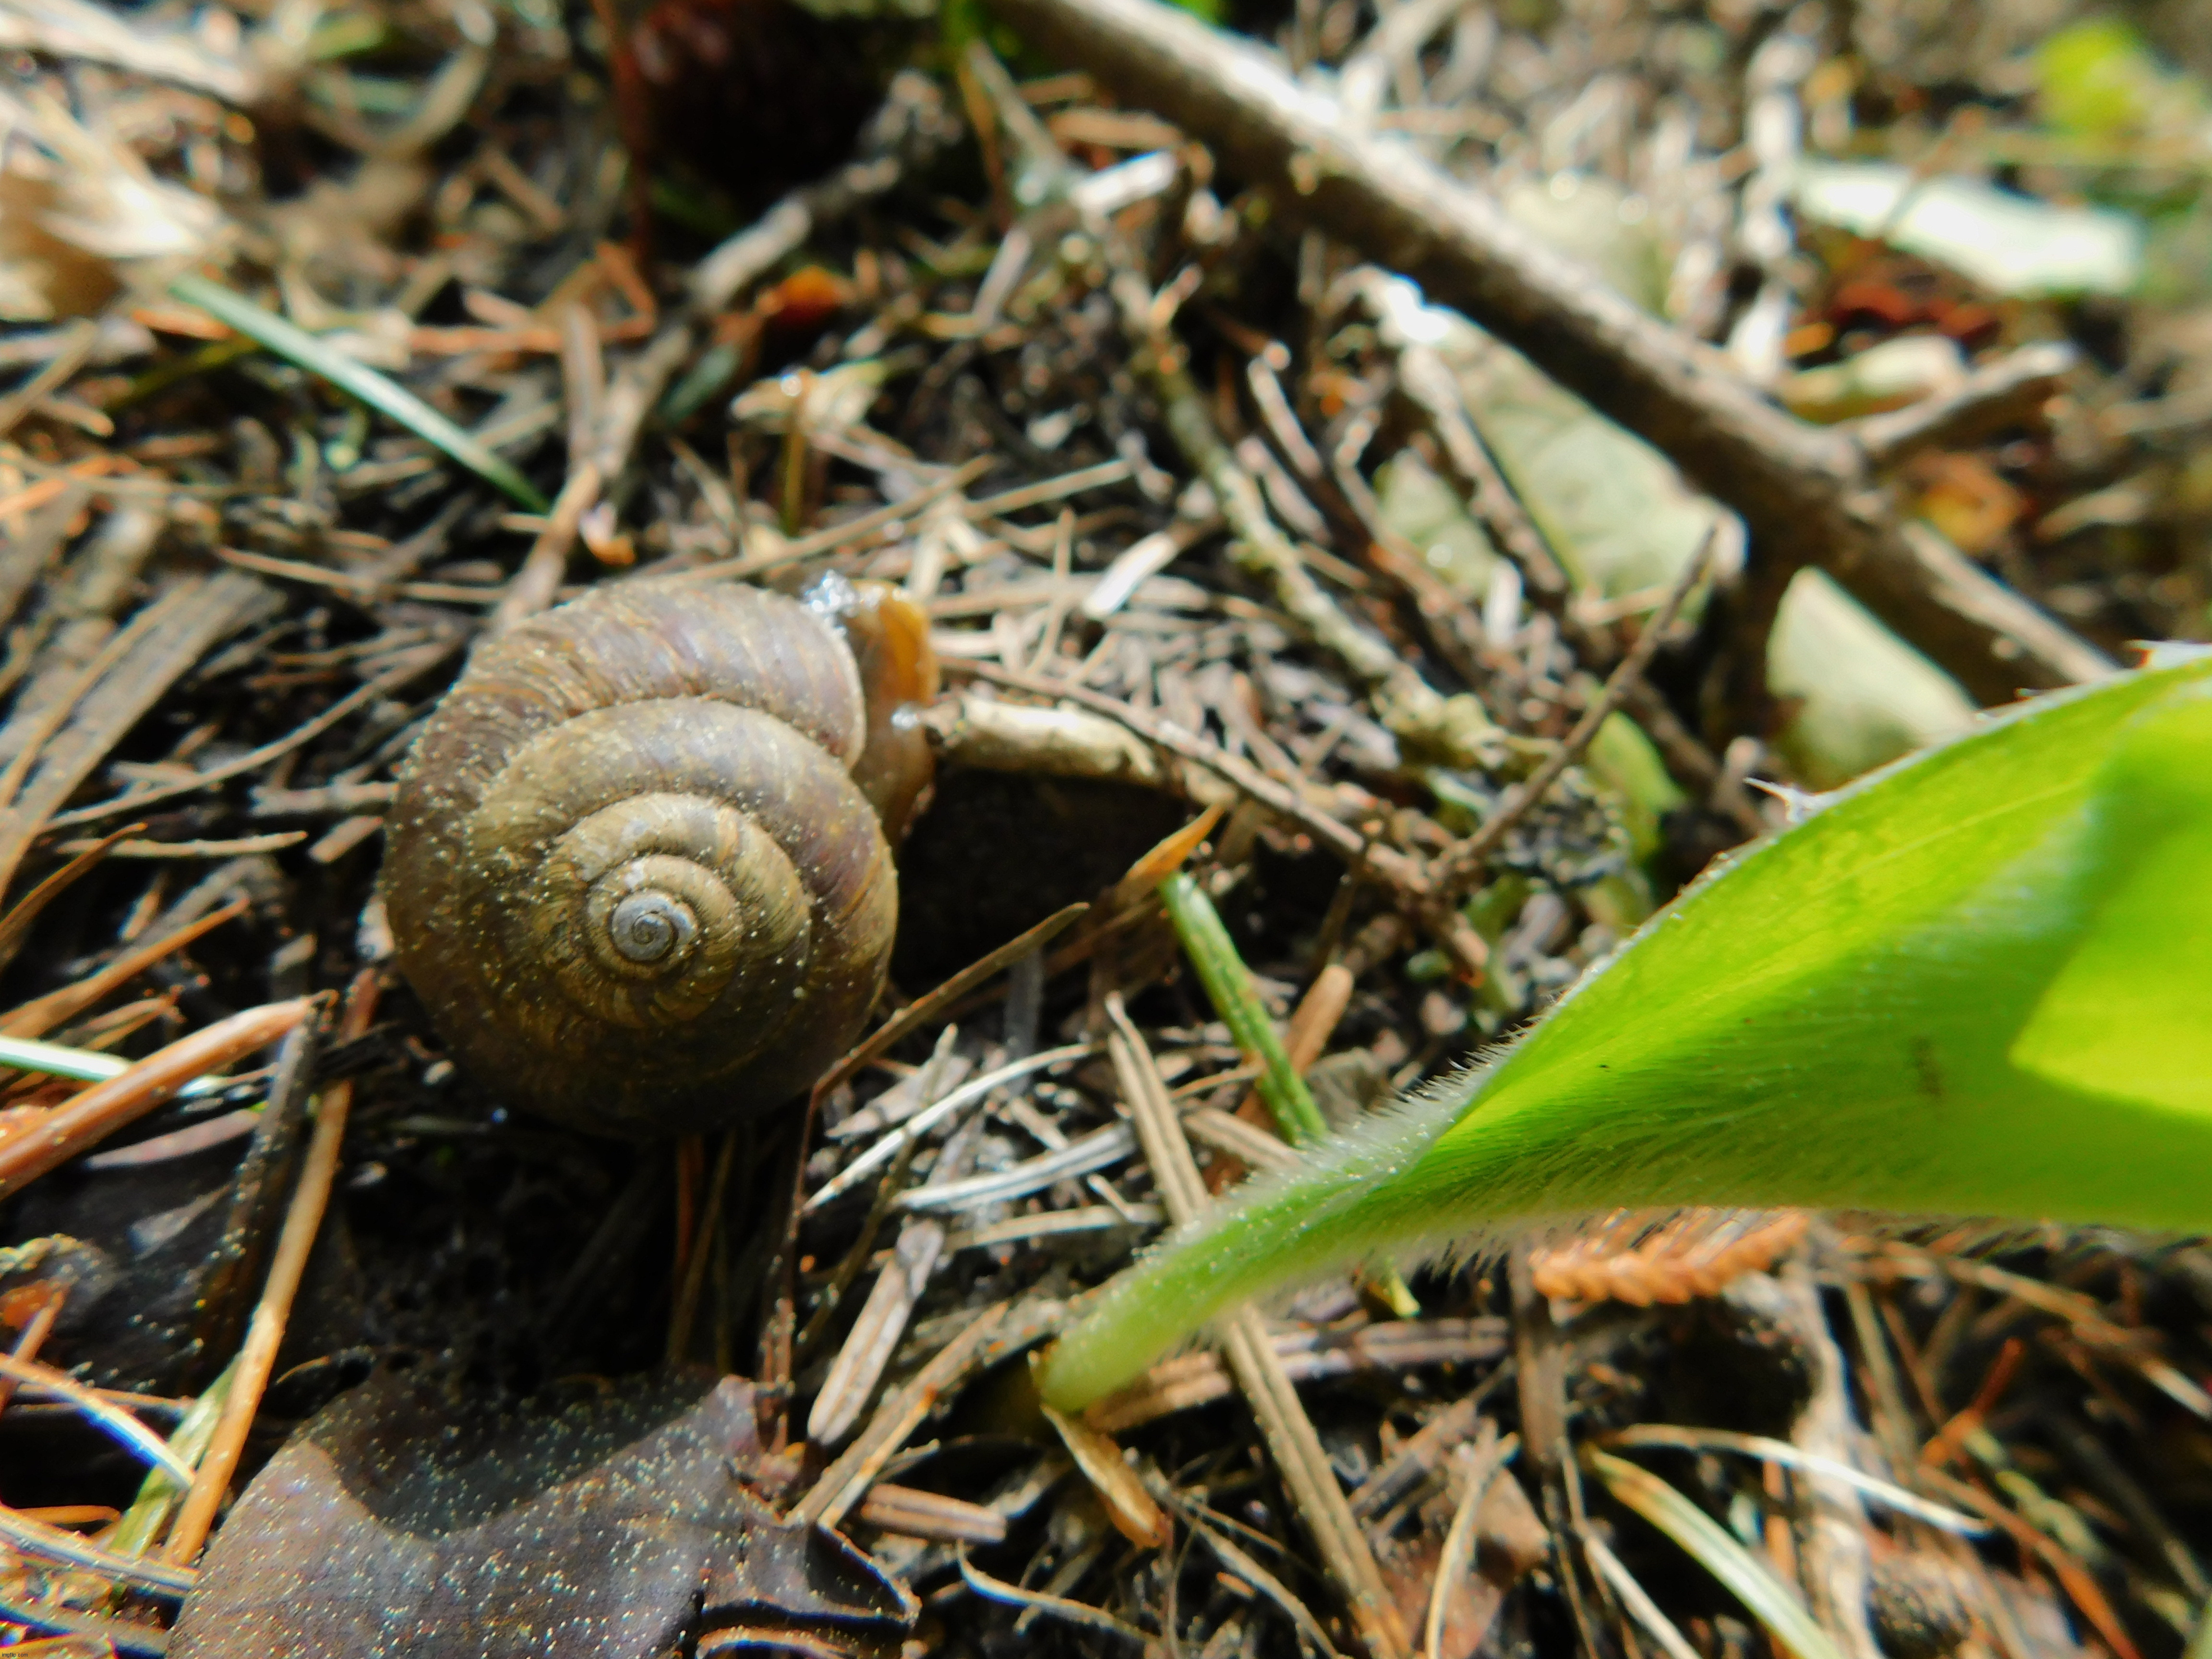 Saw this snail while walking in the woods | image tagged in photography | made w/ Imgflip meme maker